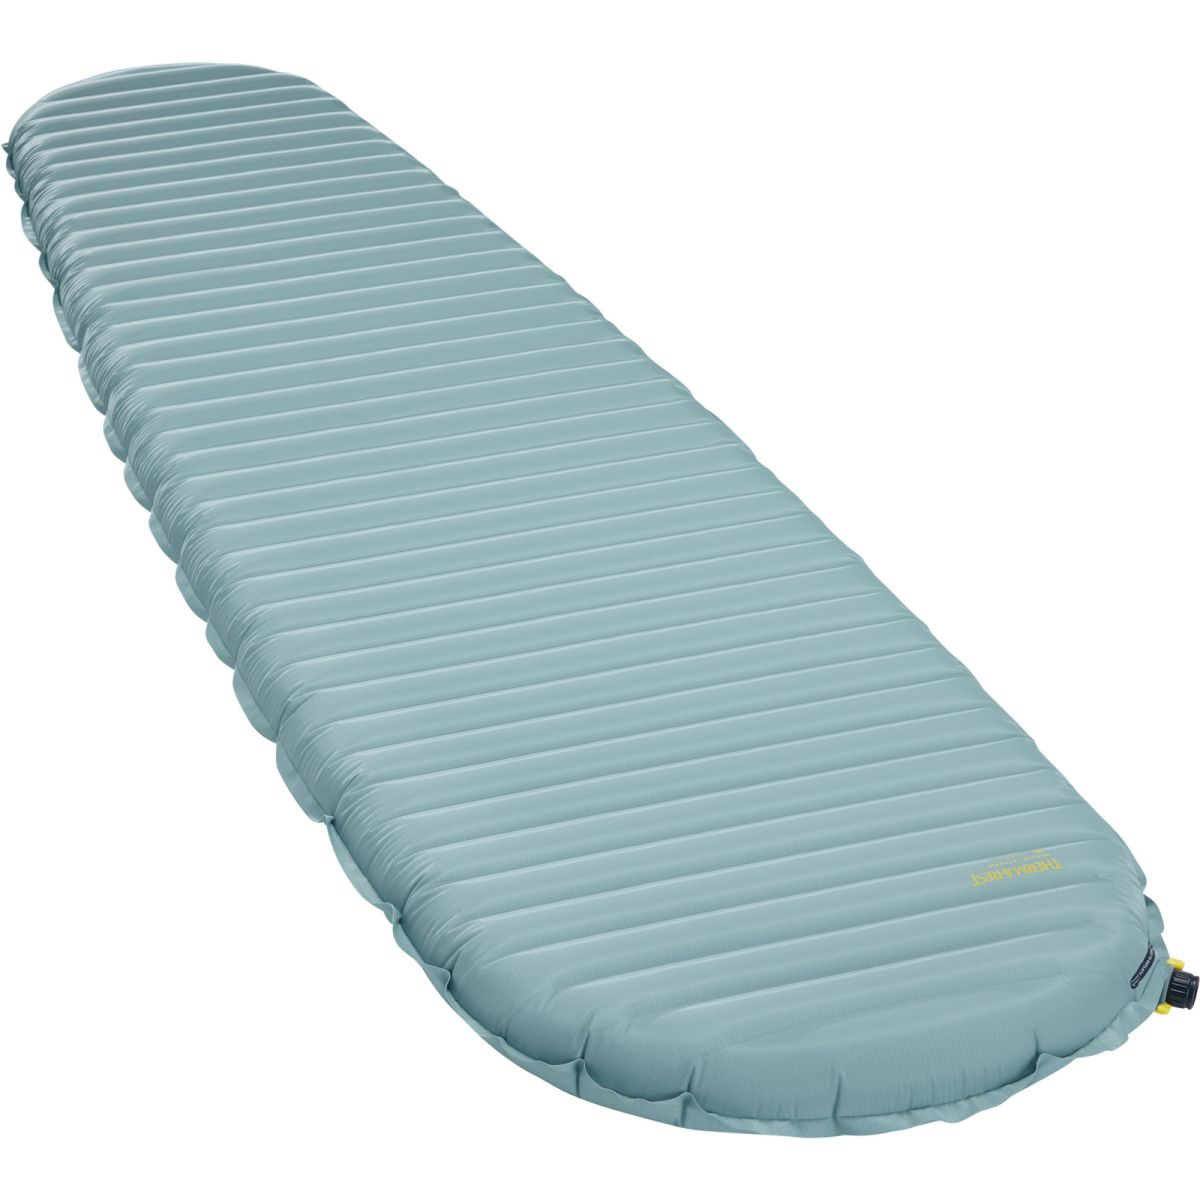  THERMAREST NEOAIR XTHERM NXT SLEEPING PAD